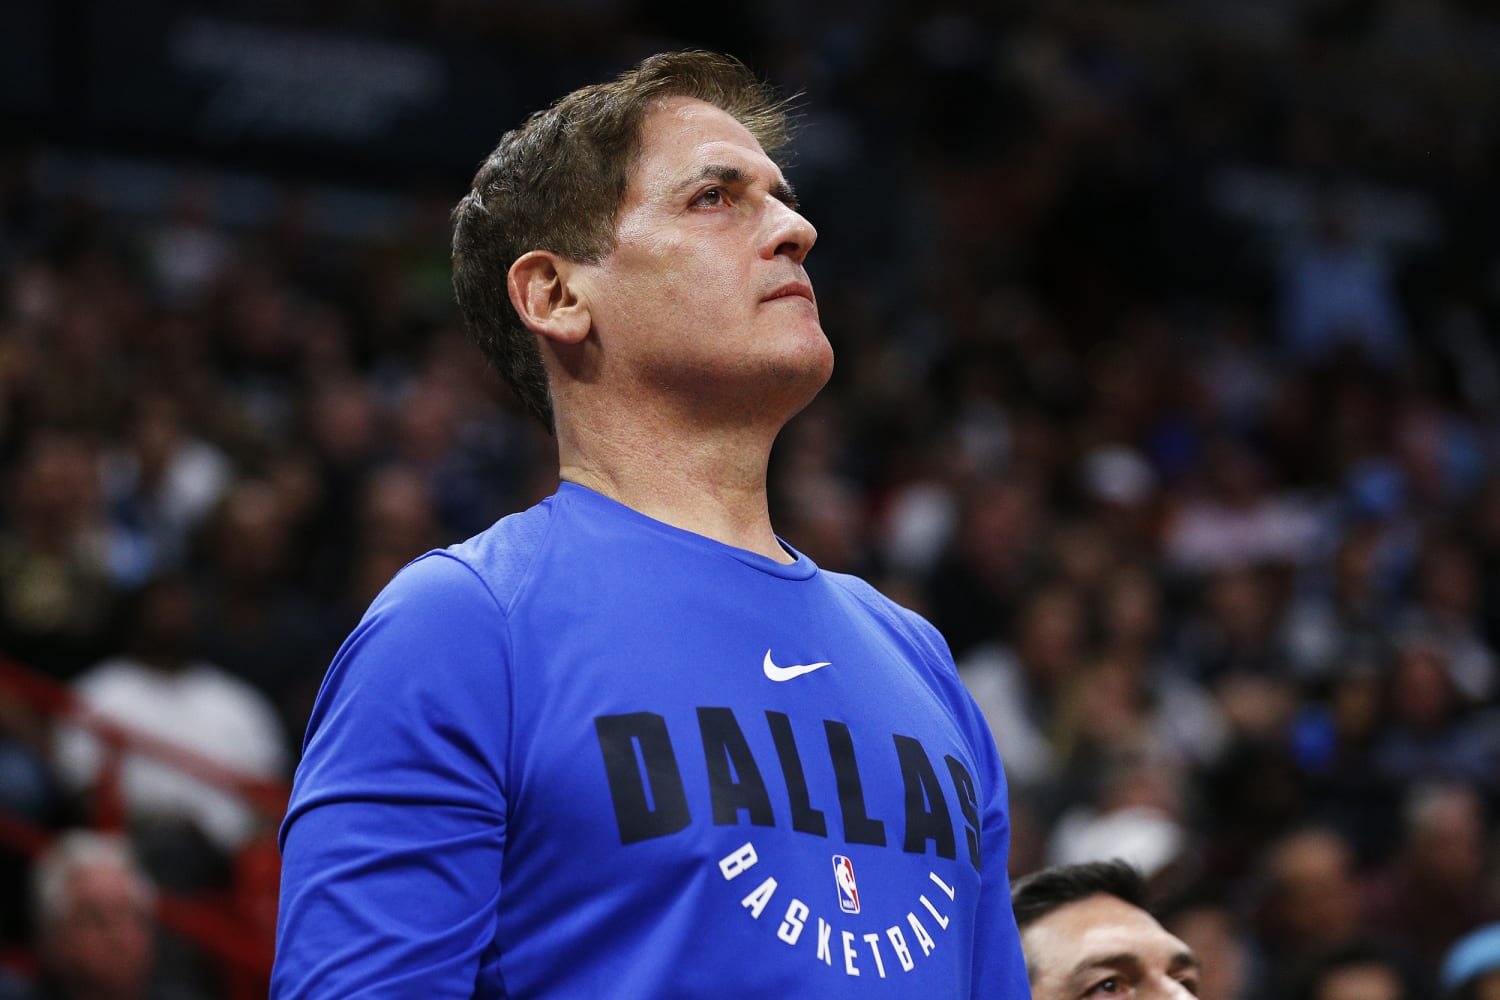 Mark Cuban buys entire, empty, town of Mustang, Texas